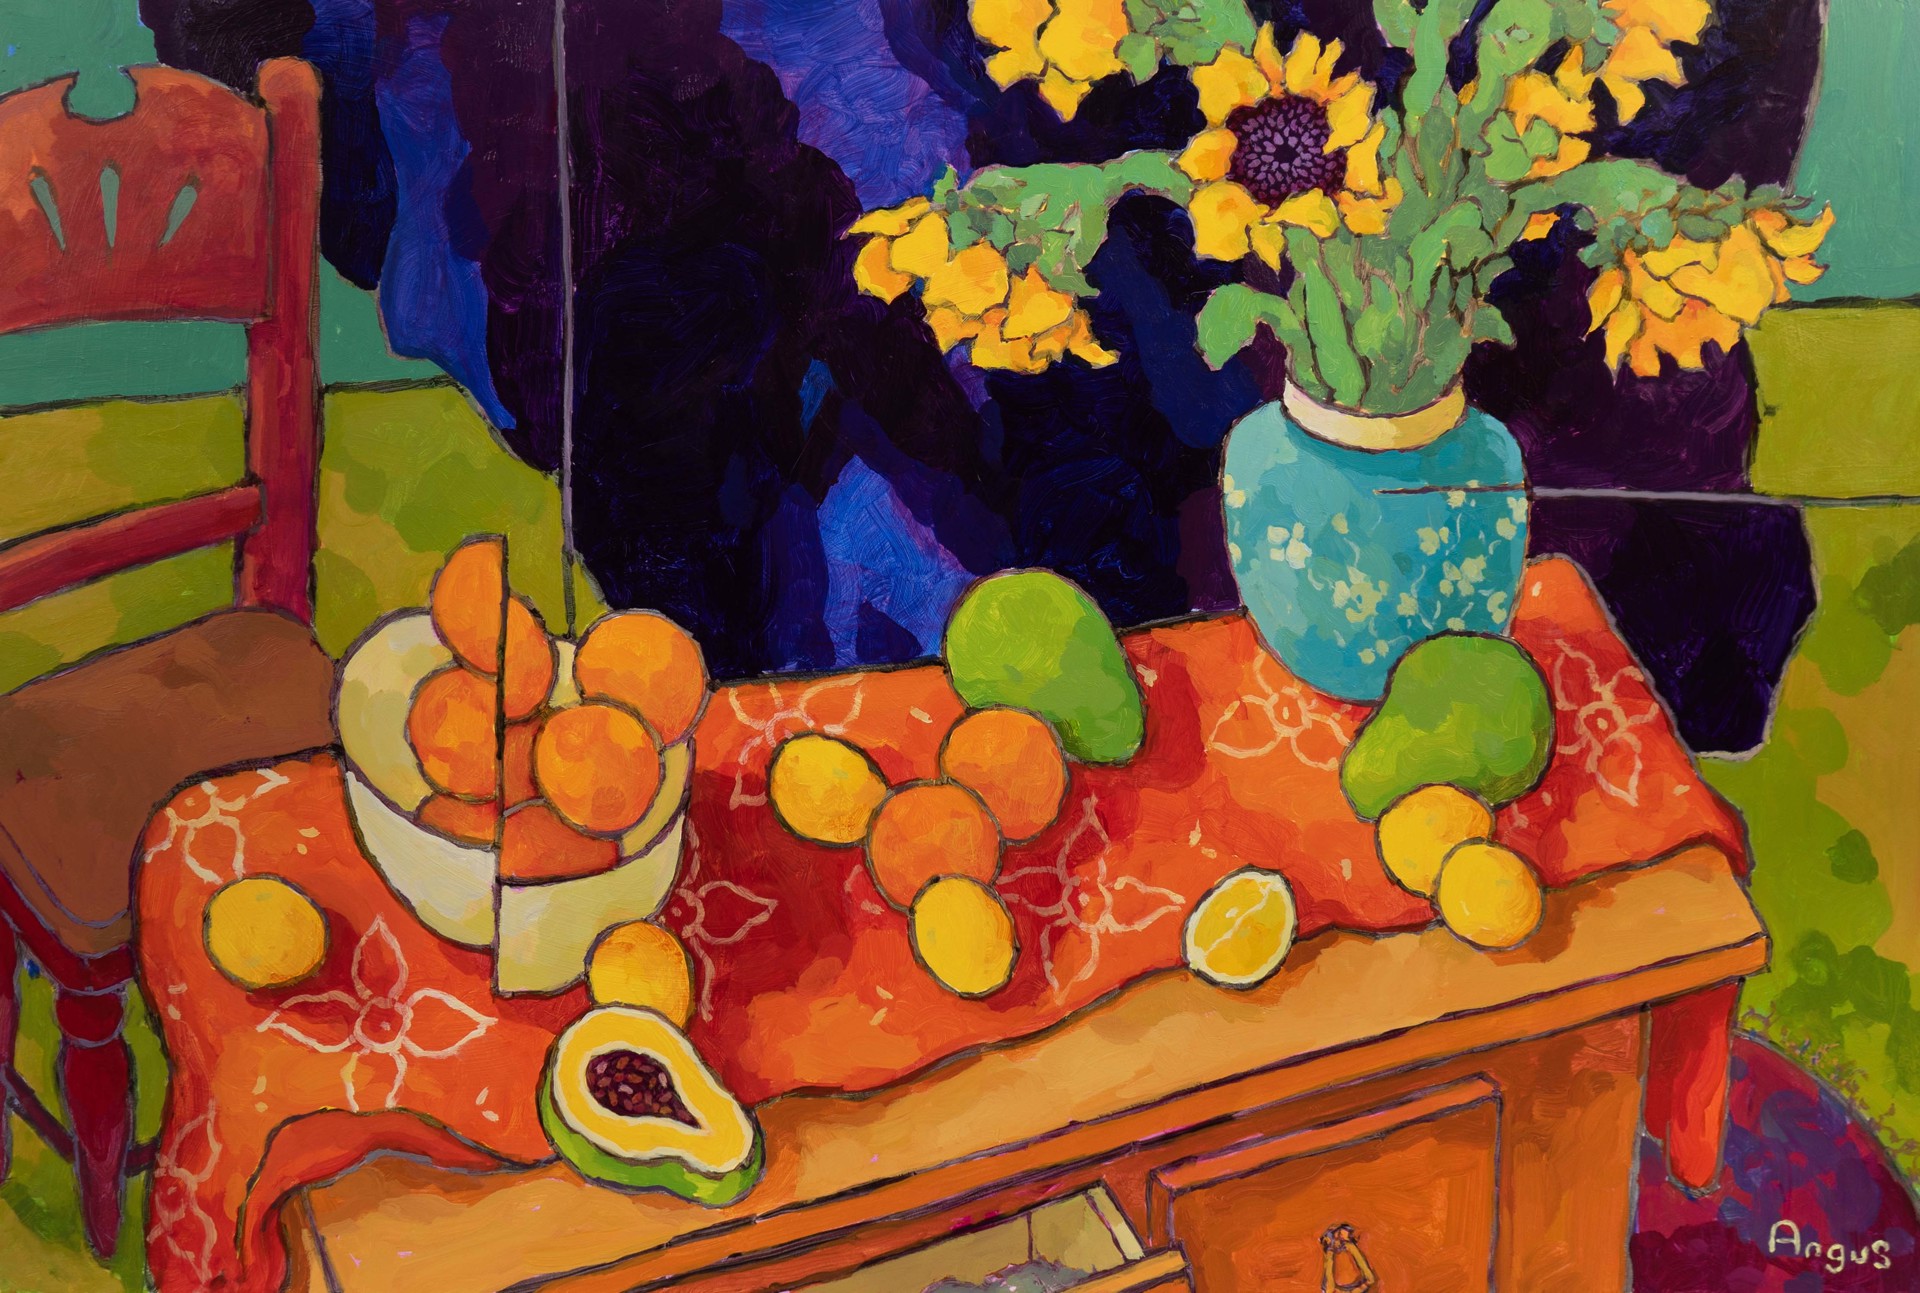 Sunflowers, Papaya & Oranges with Ginger Jar by Angus